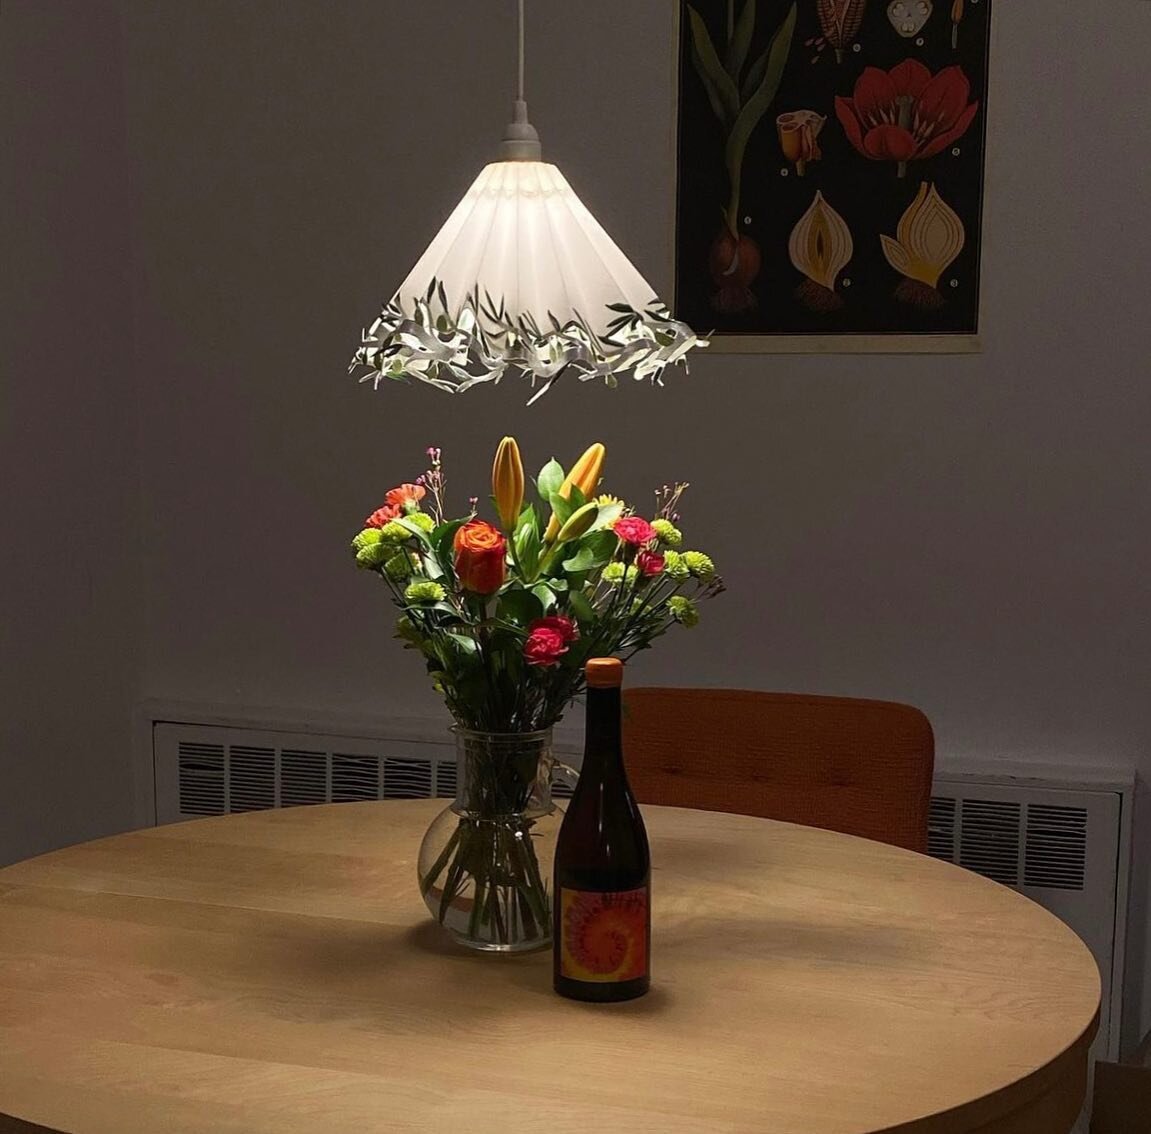 ISO of your cozy lamp pictures. I would love to see more of my designs shining in their homes. DM or tag me if you got &lsquo;em!

I also want to share how much I value the human connections I&rsquo;ve made through this app, especially as of late sin